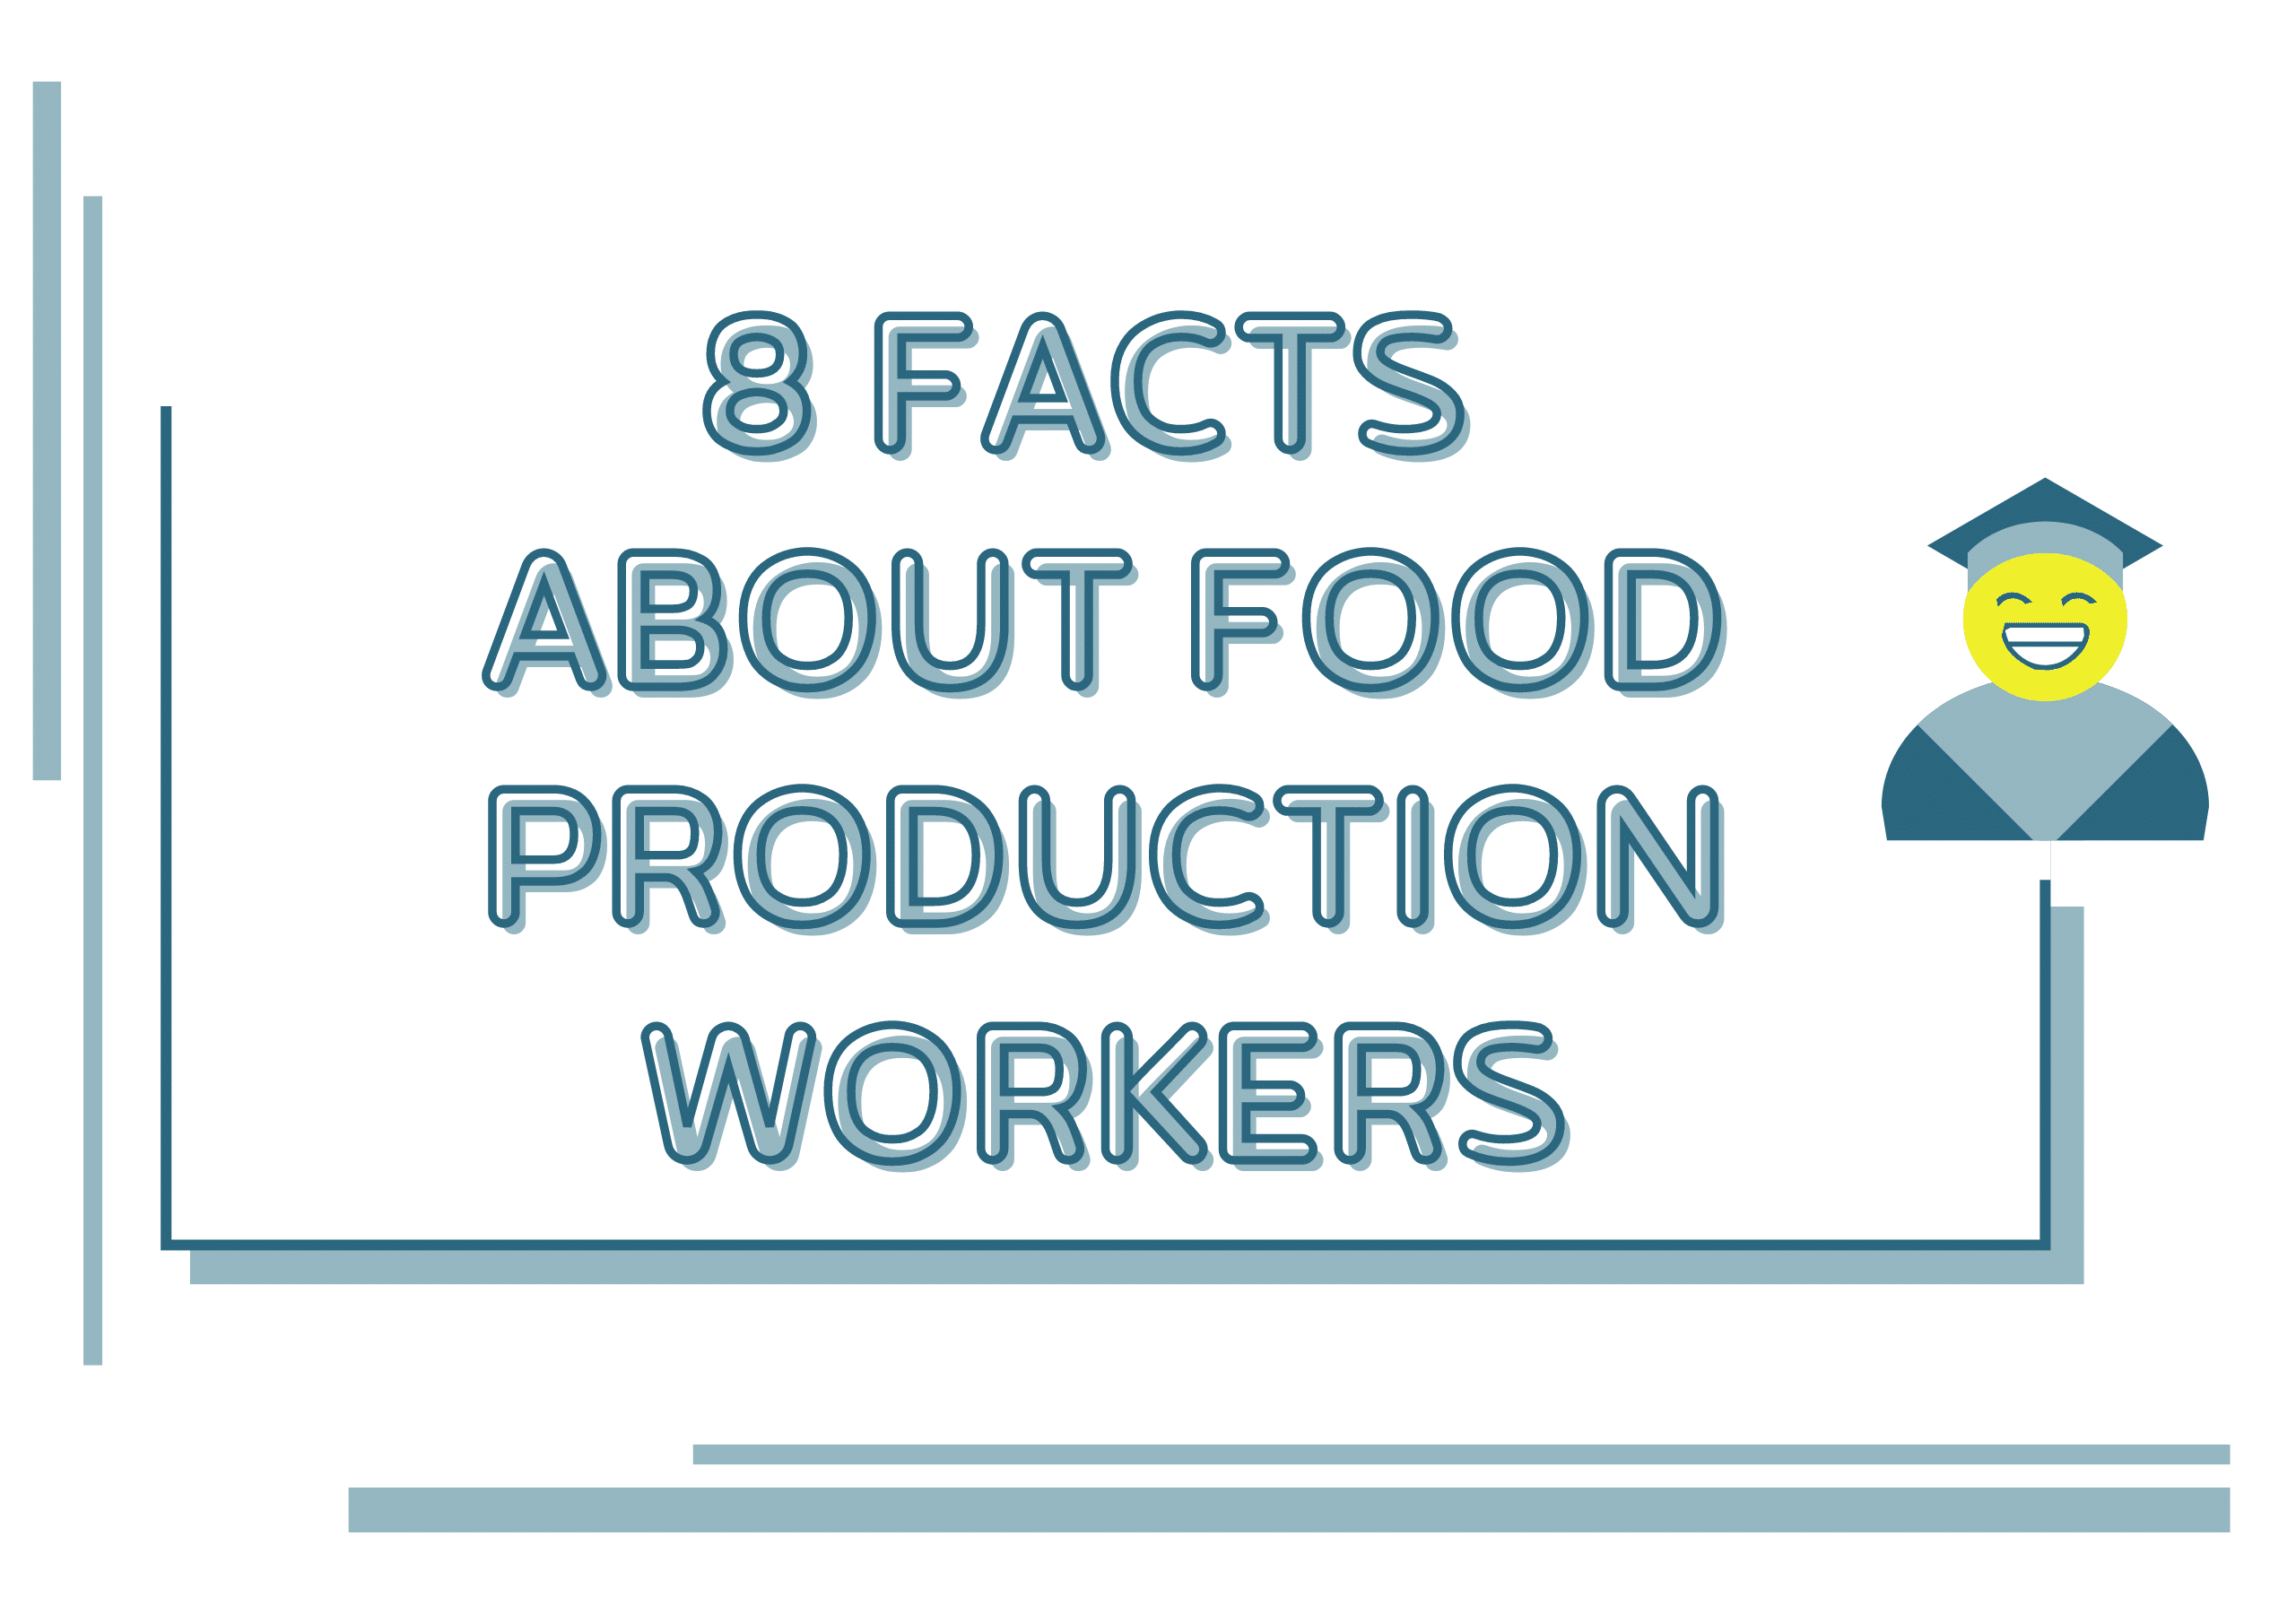 8 Facts About Food Production Workers